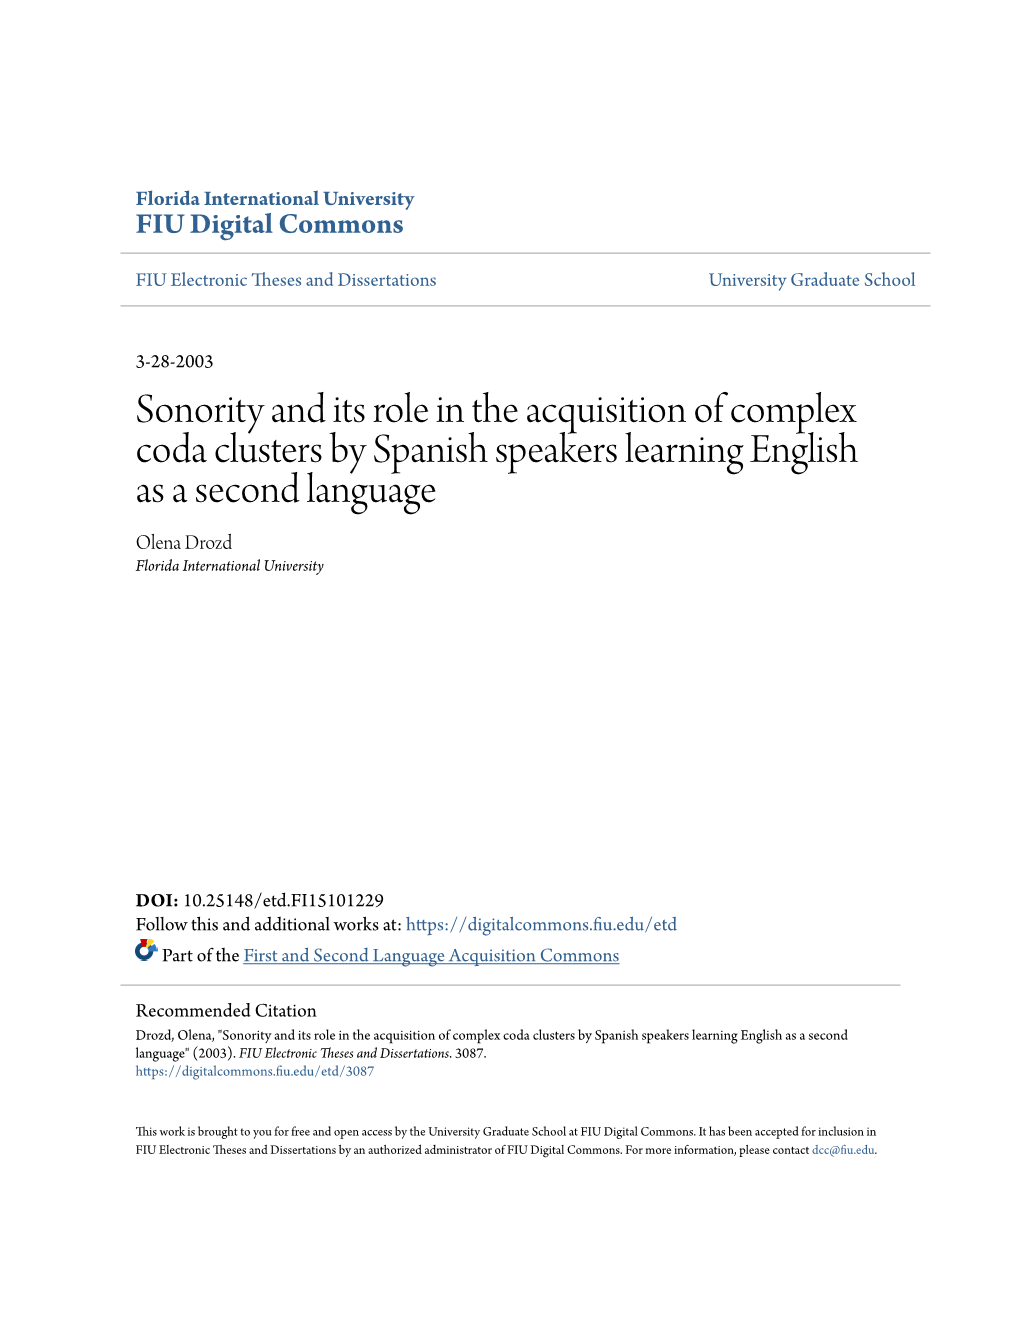 Sonority and Its Role in the Acquisition of Complex Coda Clusters by Spanish Speakers Learning English As a Second Language